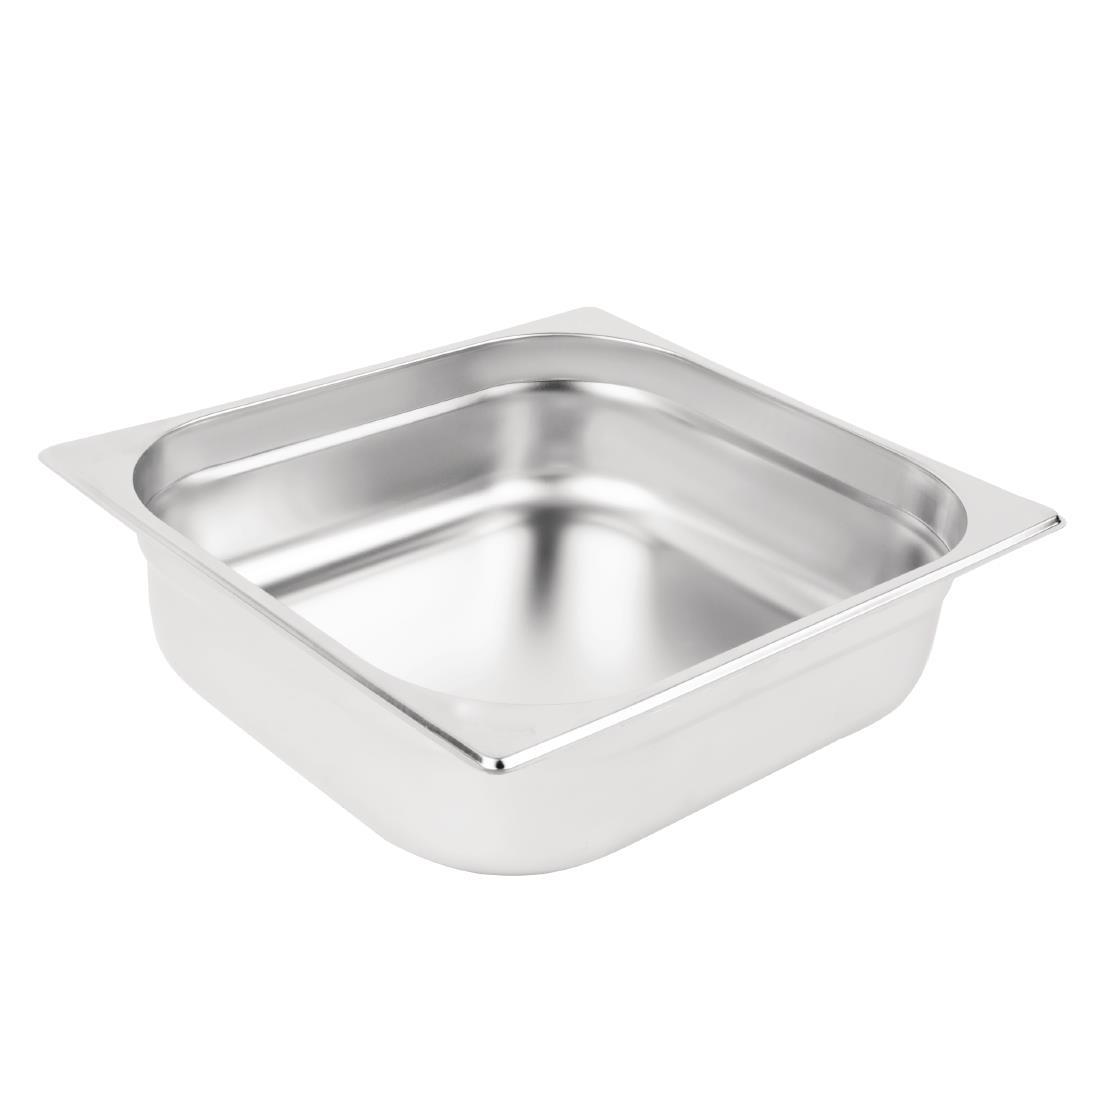 Vogue Stainless Steel 2/3 Gastronorm Pan 100mm - K812  - 1